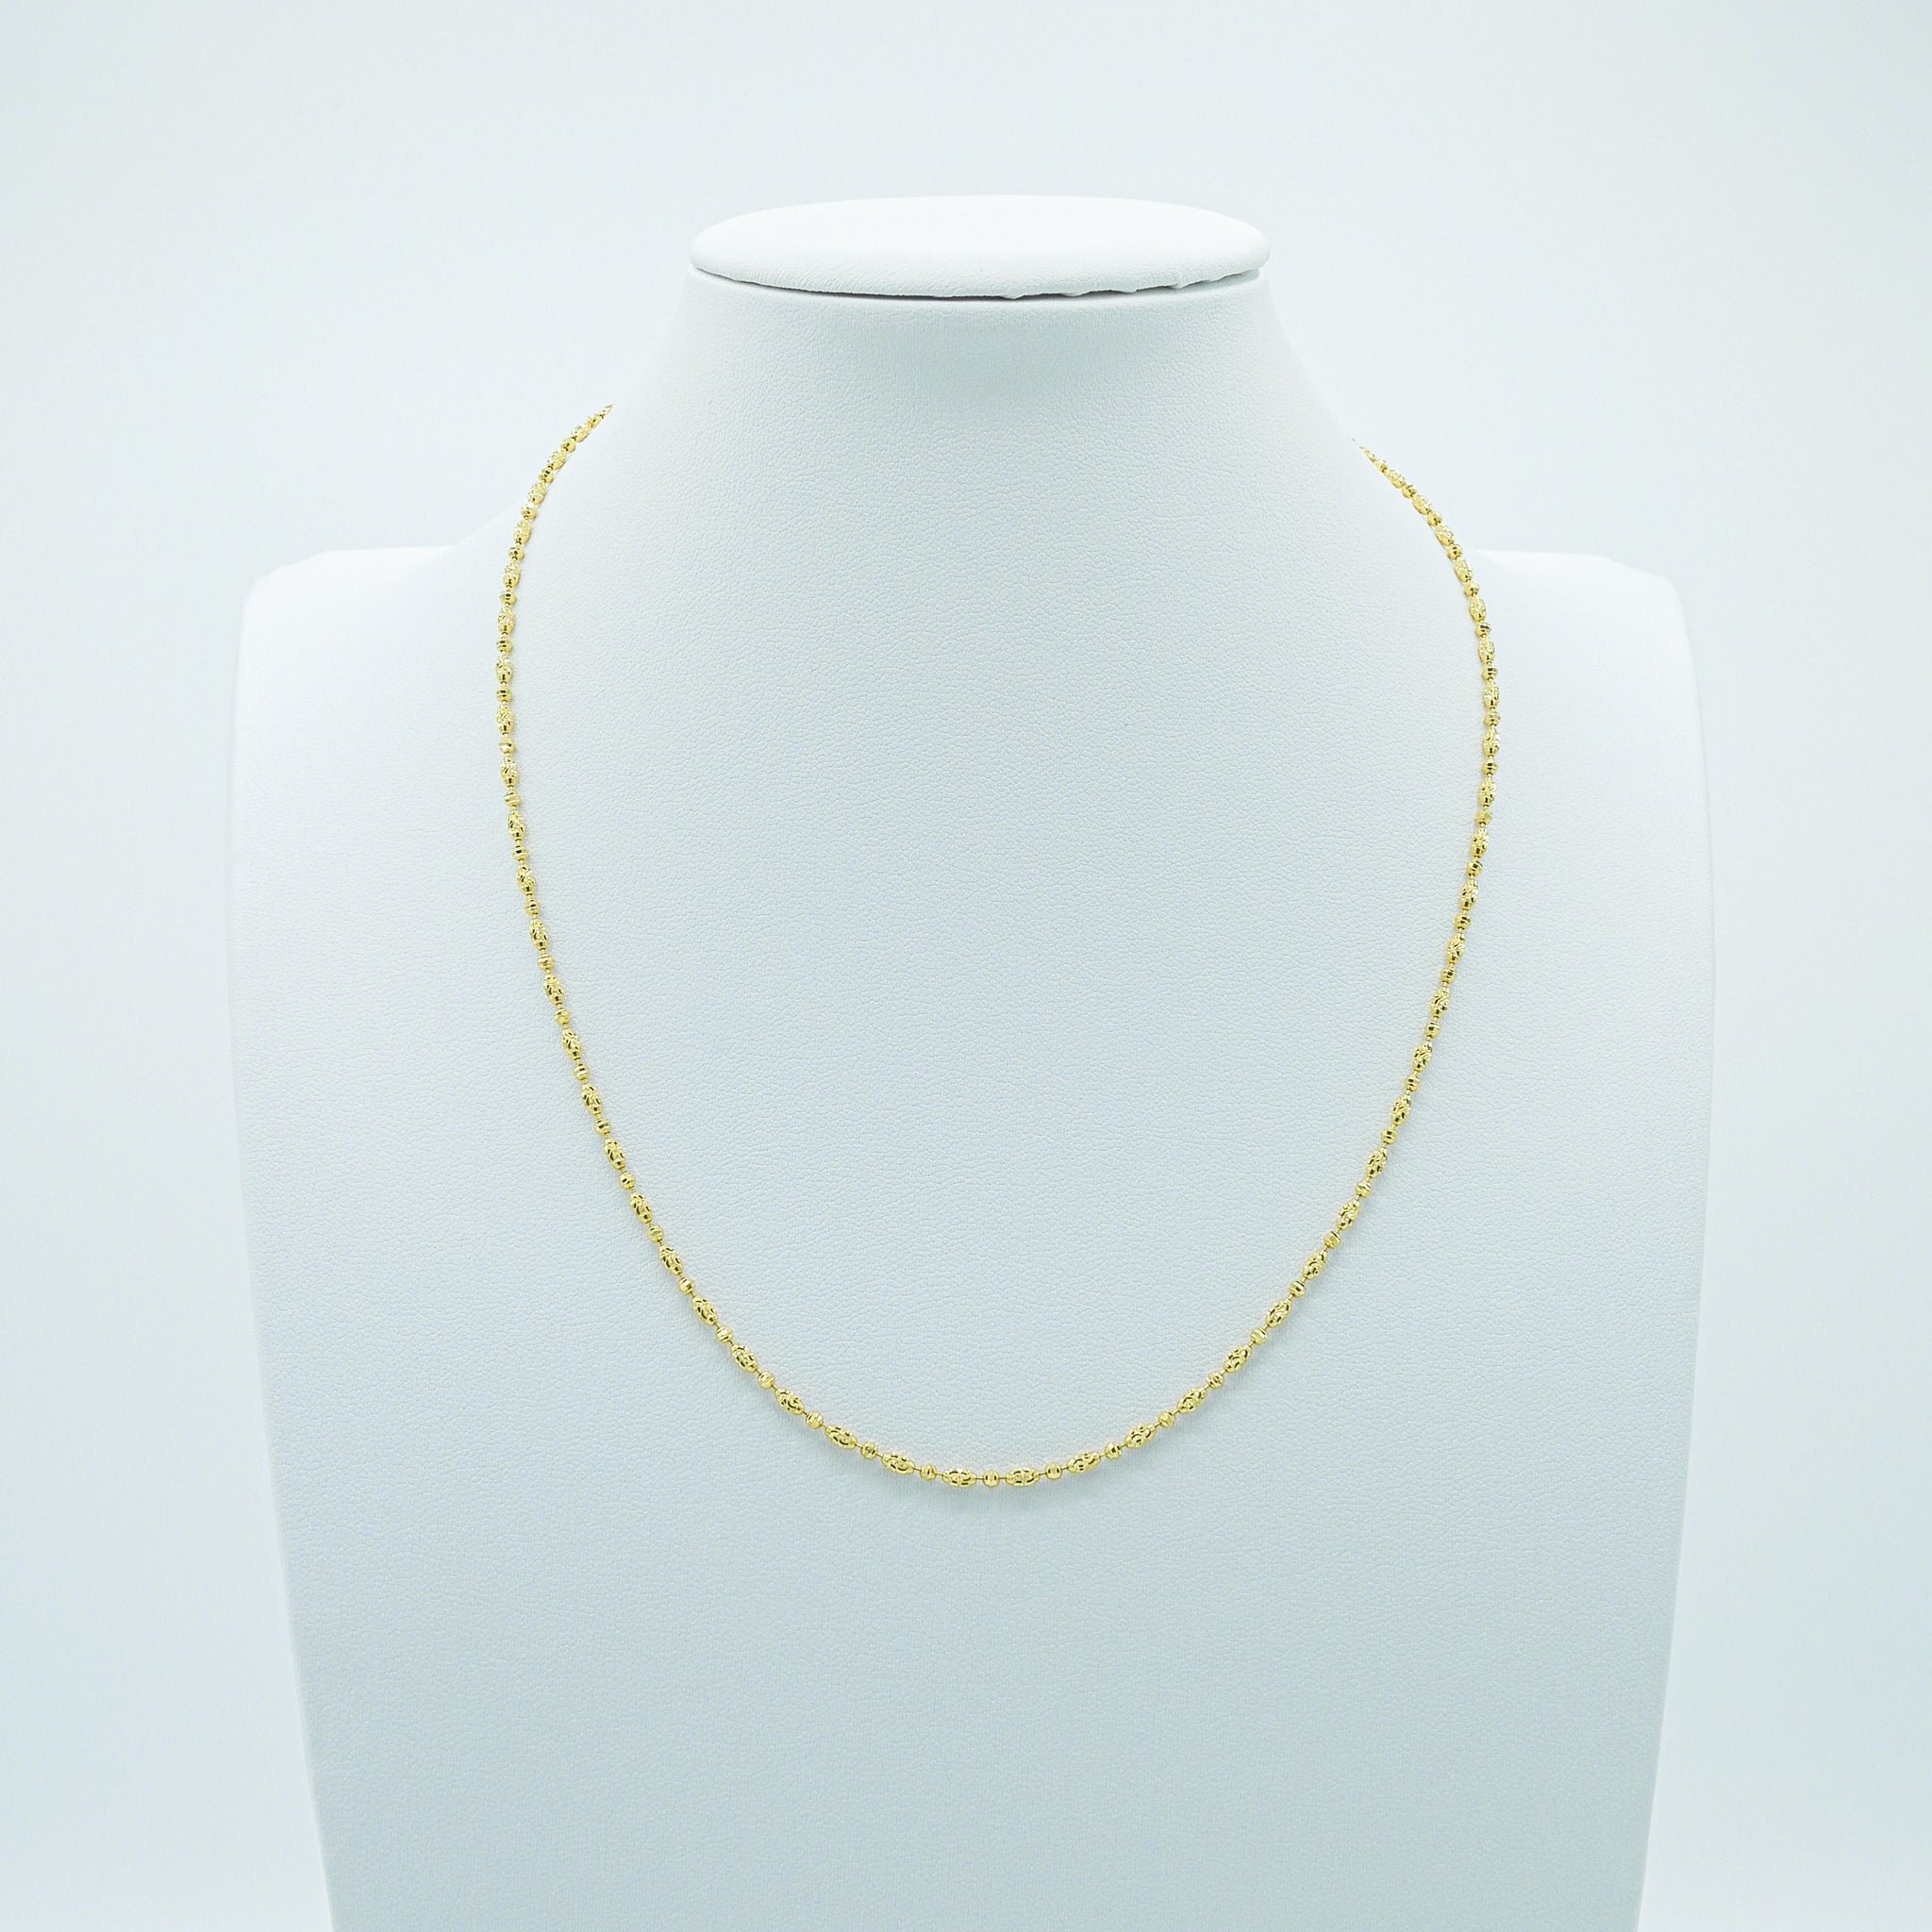 14K Solid Yellow Gold Beaded Chain